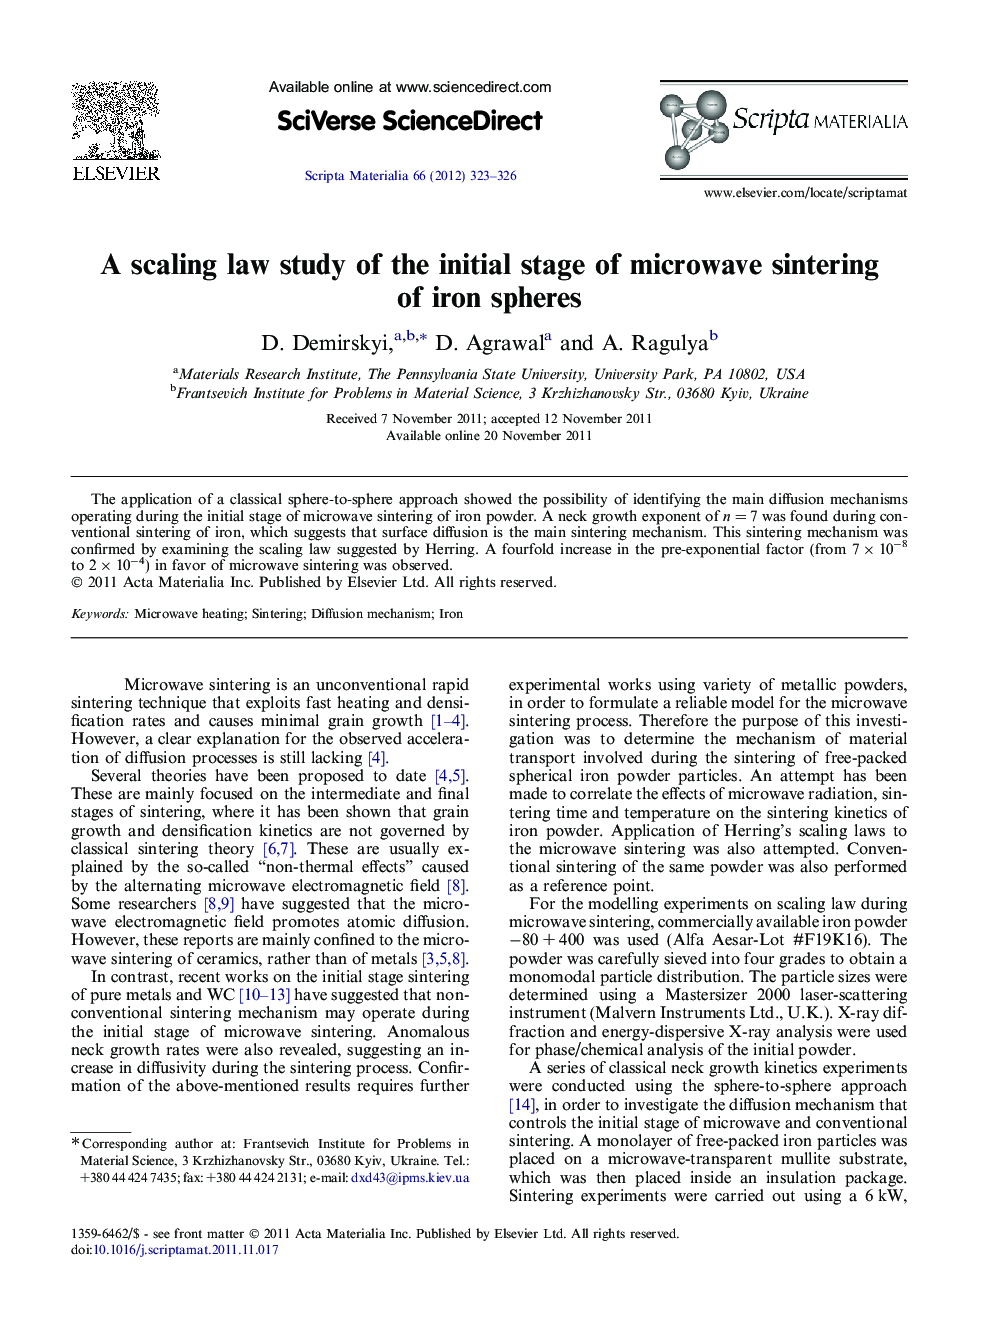 A scaling law study of the initial stage of microwave sintering of iron spheres